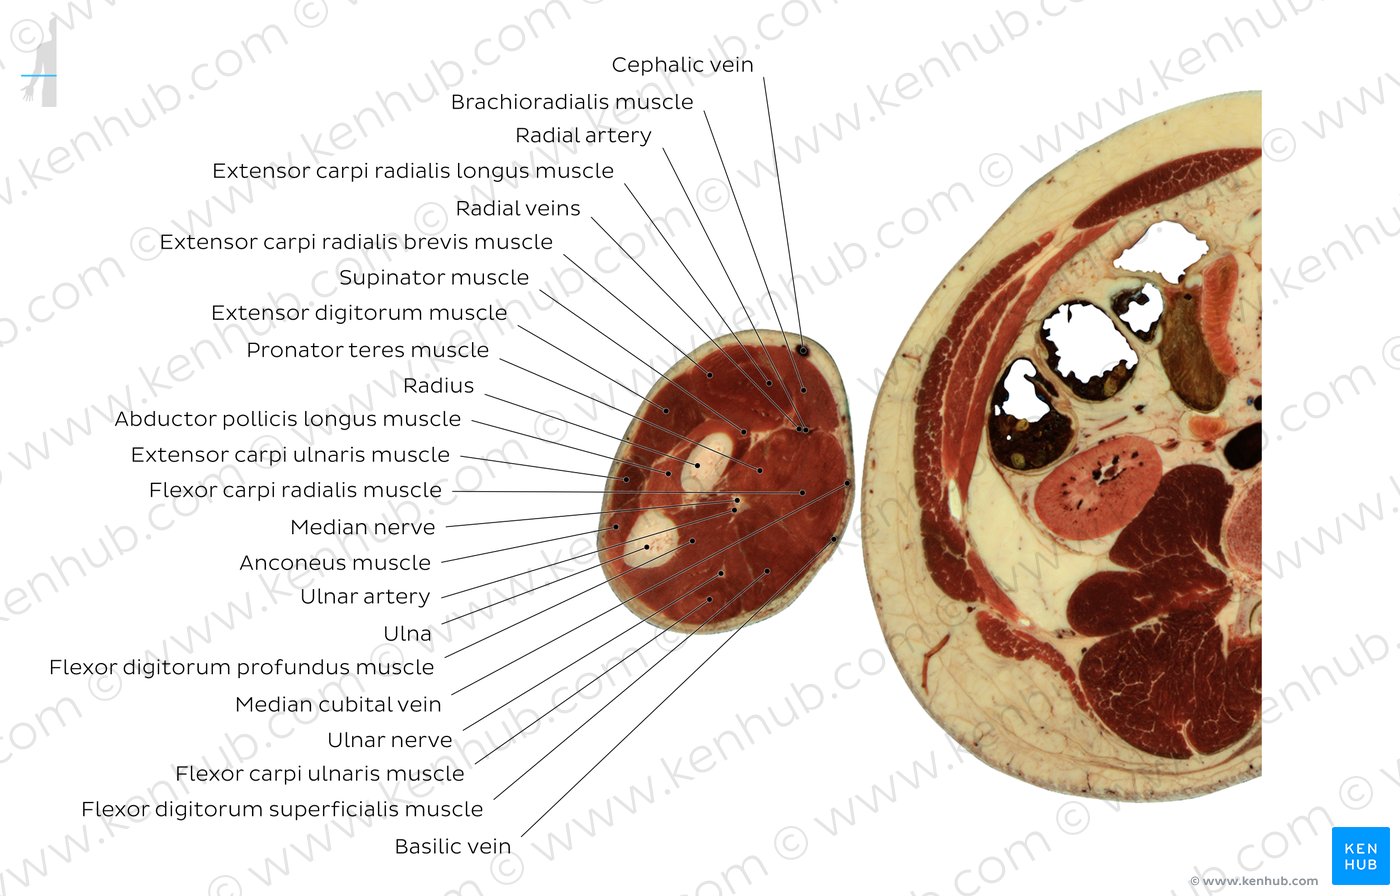 Supinator muscle level: Overview